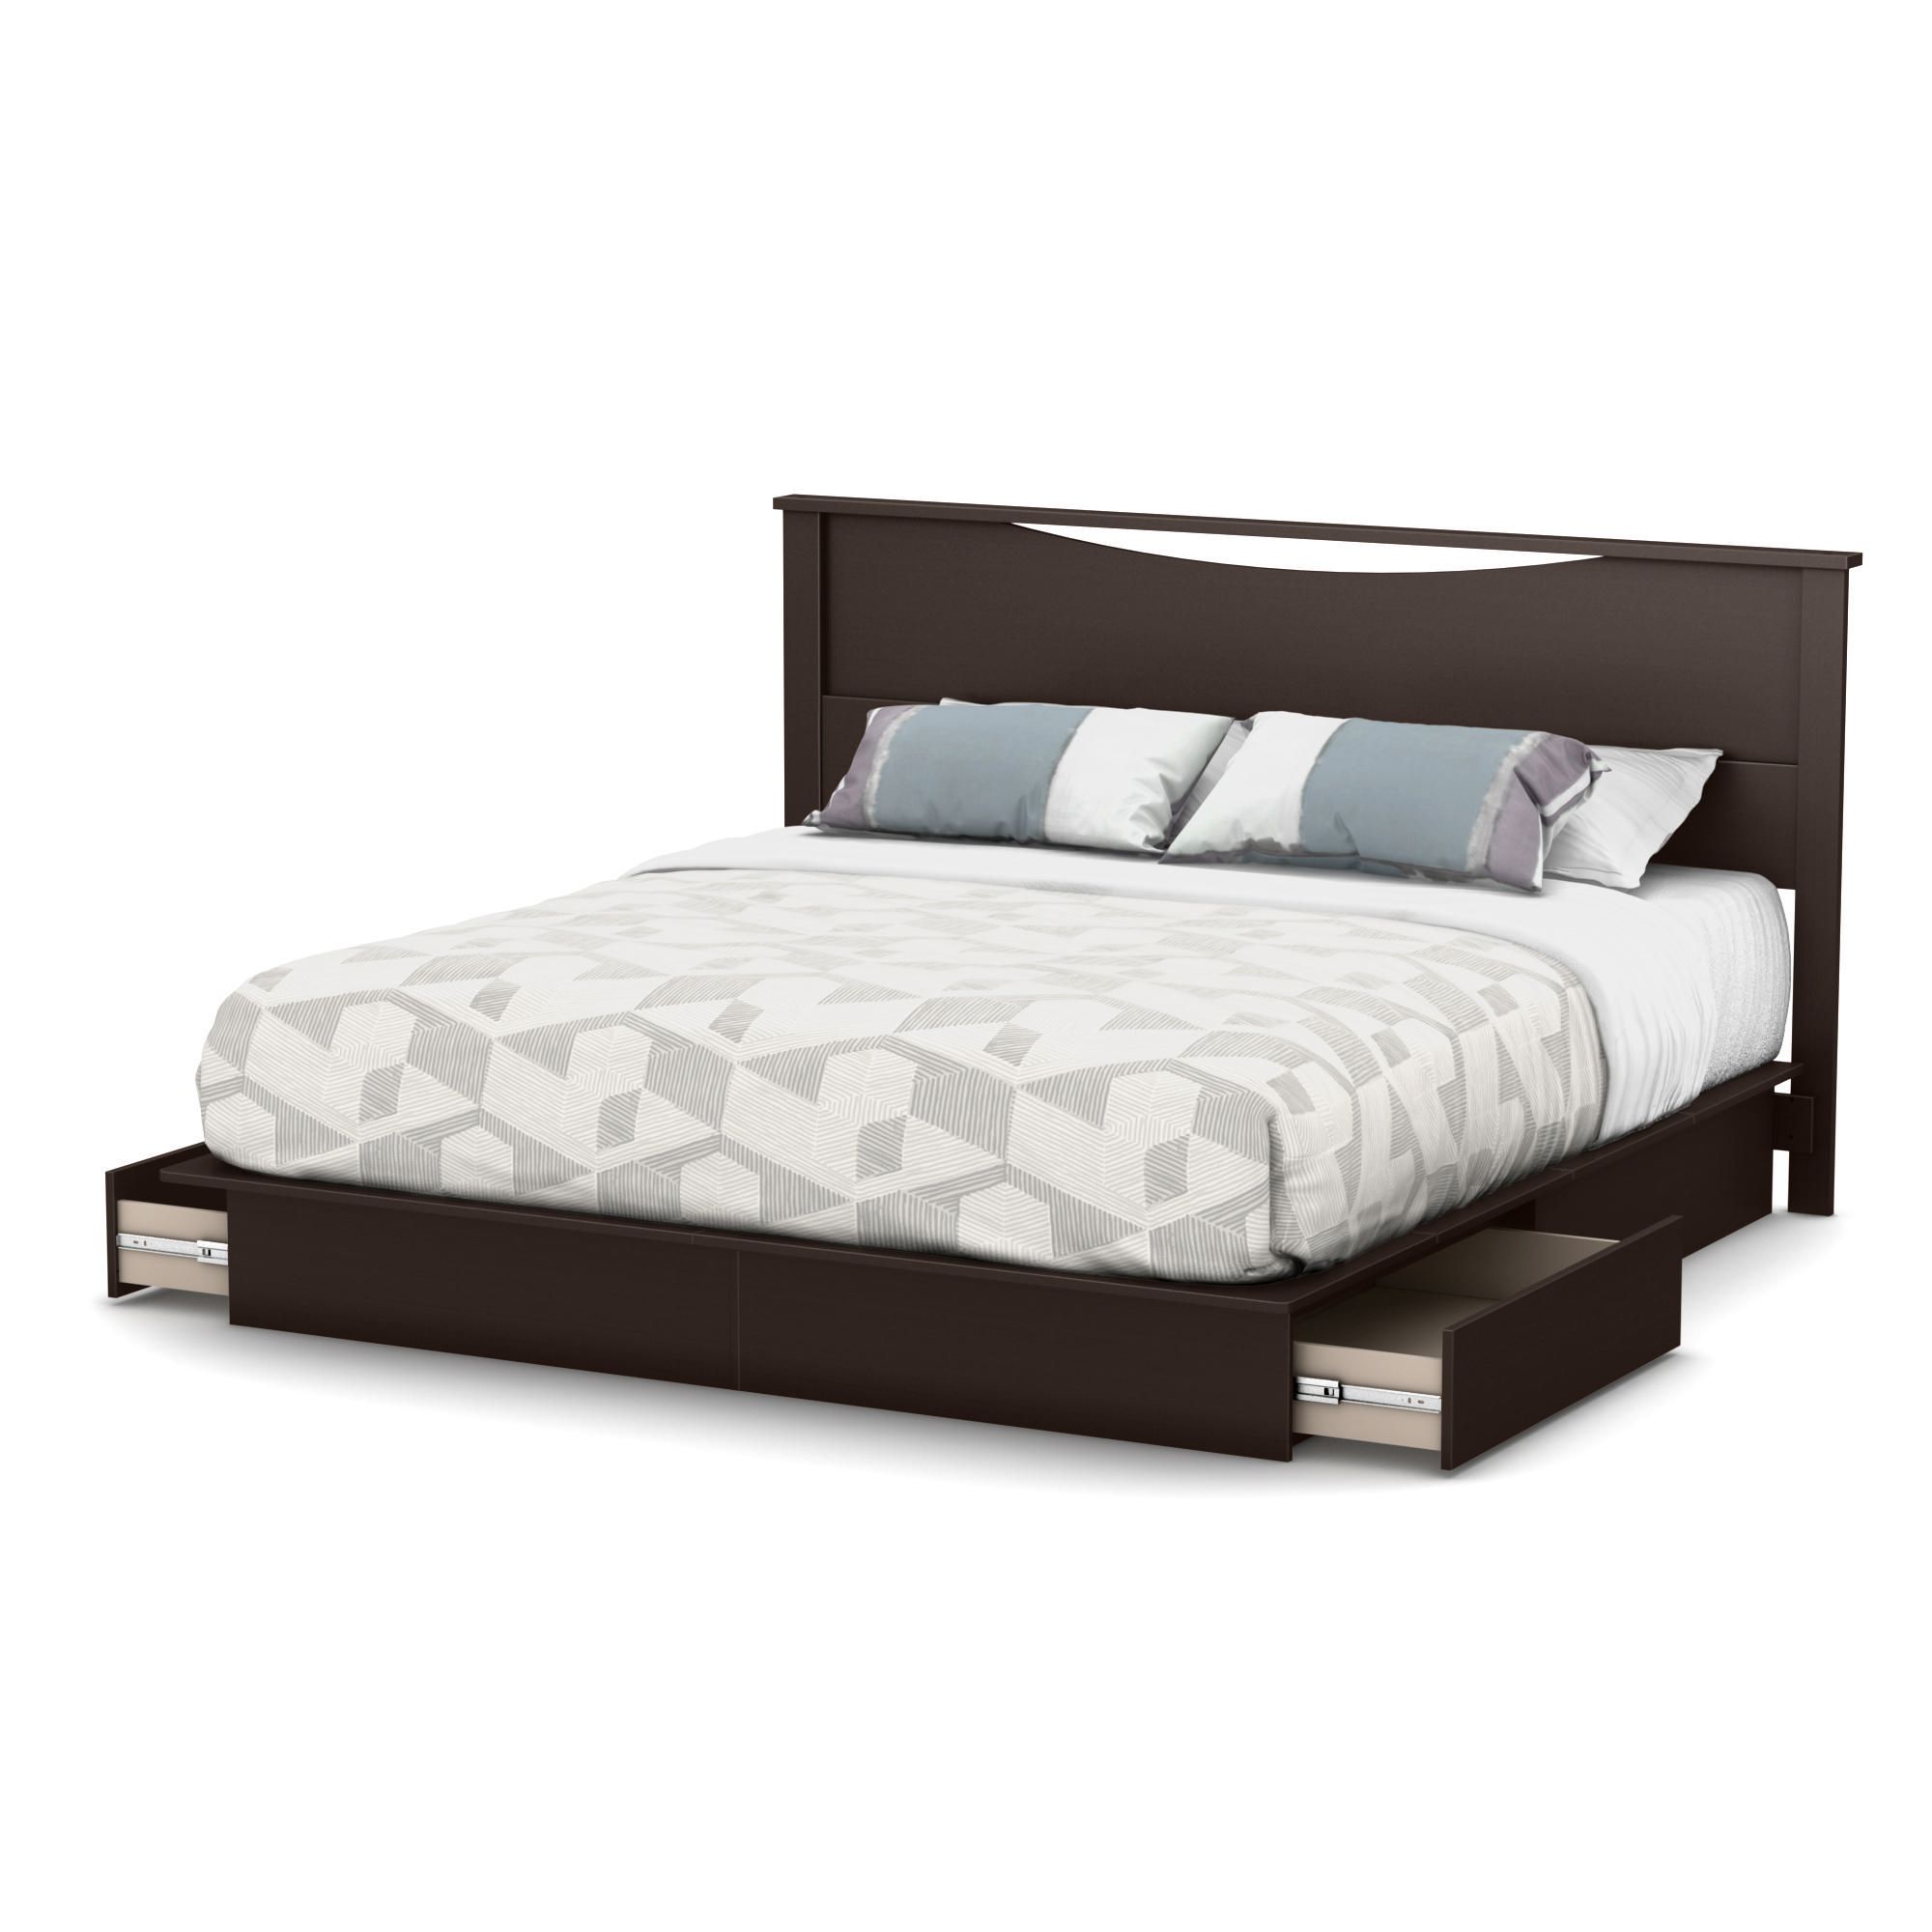 King Platform Bed 78 With Drawers, King Size Bed With Storage Canada